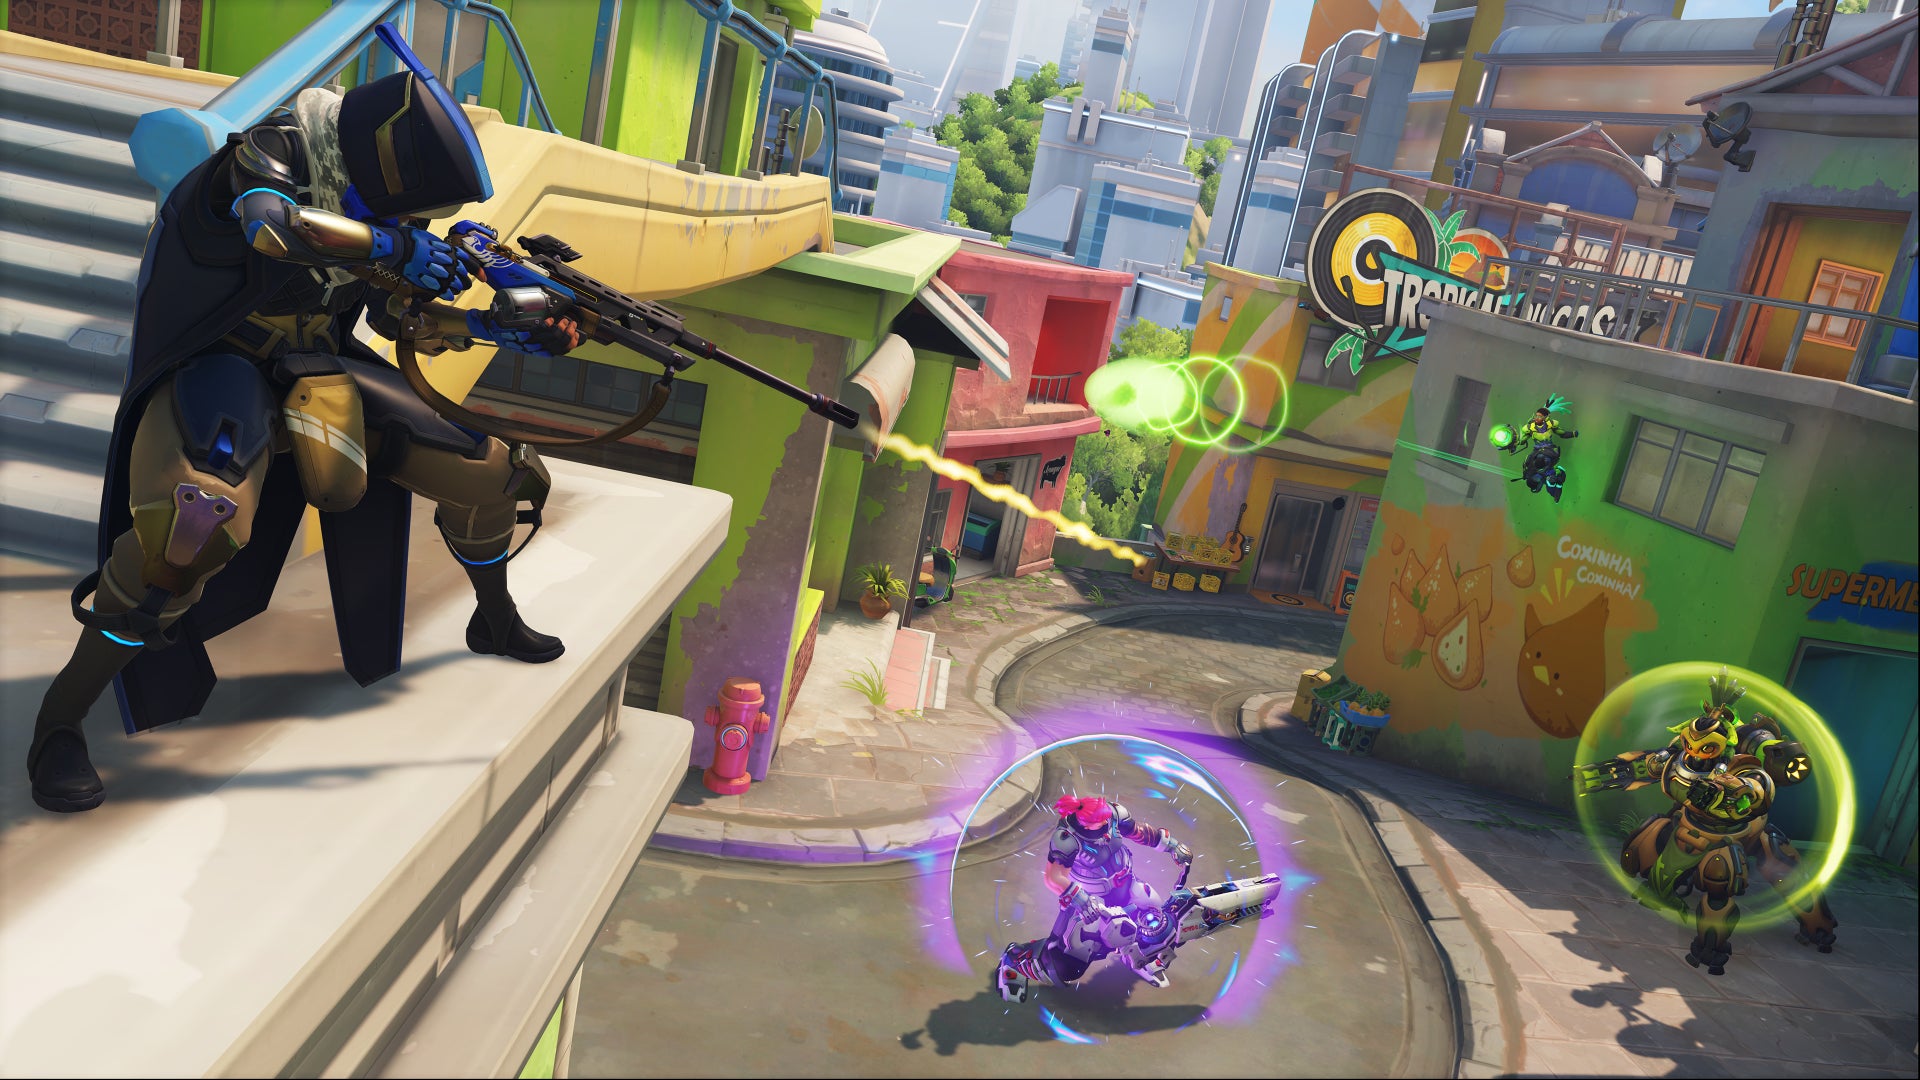 Ana, a hero in Overwatch 2, perches on a rooftop and shoots down at an Orisa, Lucio, and Zarya on the street below.